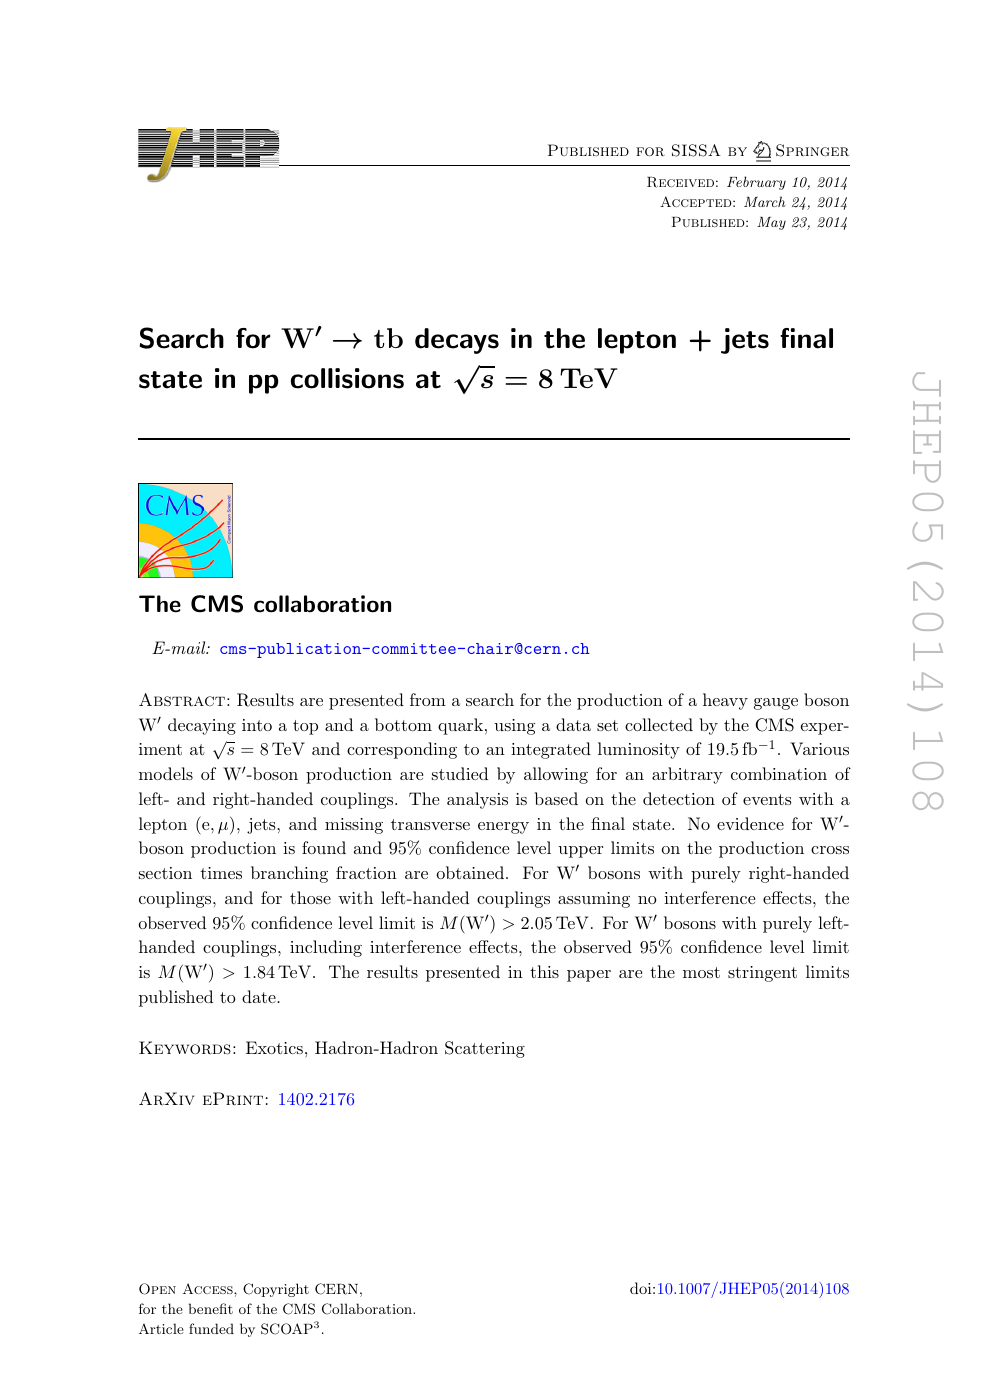 Search For W Tb Decays In The Lepton Jets Final State In Pp Collisions At Sqrt S 8 Tev Topic Of Research Paper In Physical Sciences Download